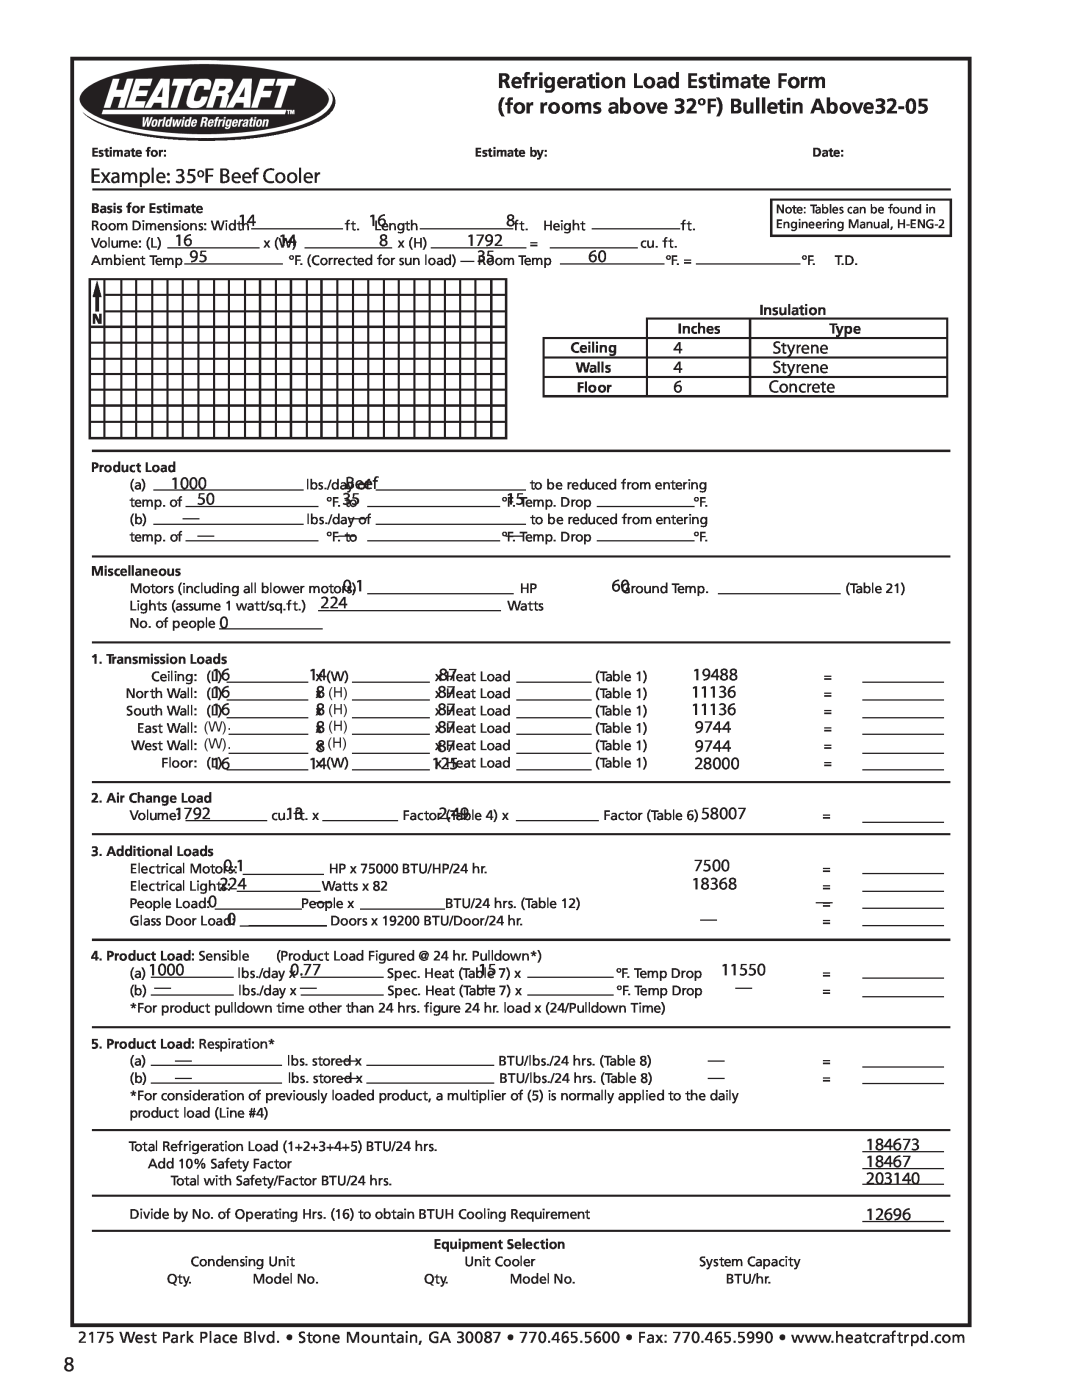 Heatcraft Refrigeration Products H-ENGM0806, H-ENGM0408 manual Example 35ºF Beef Cooler, Refrigeration Load Estimate Form 